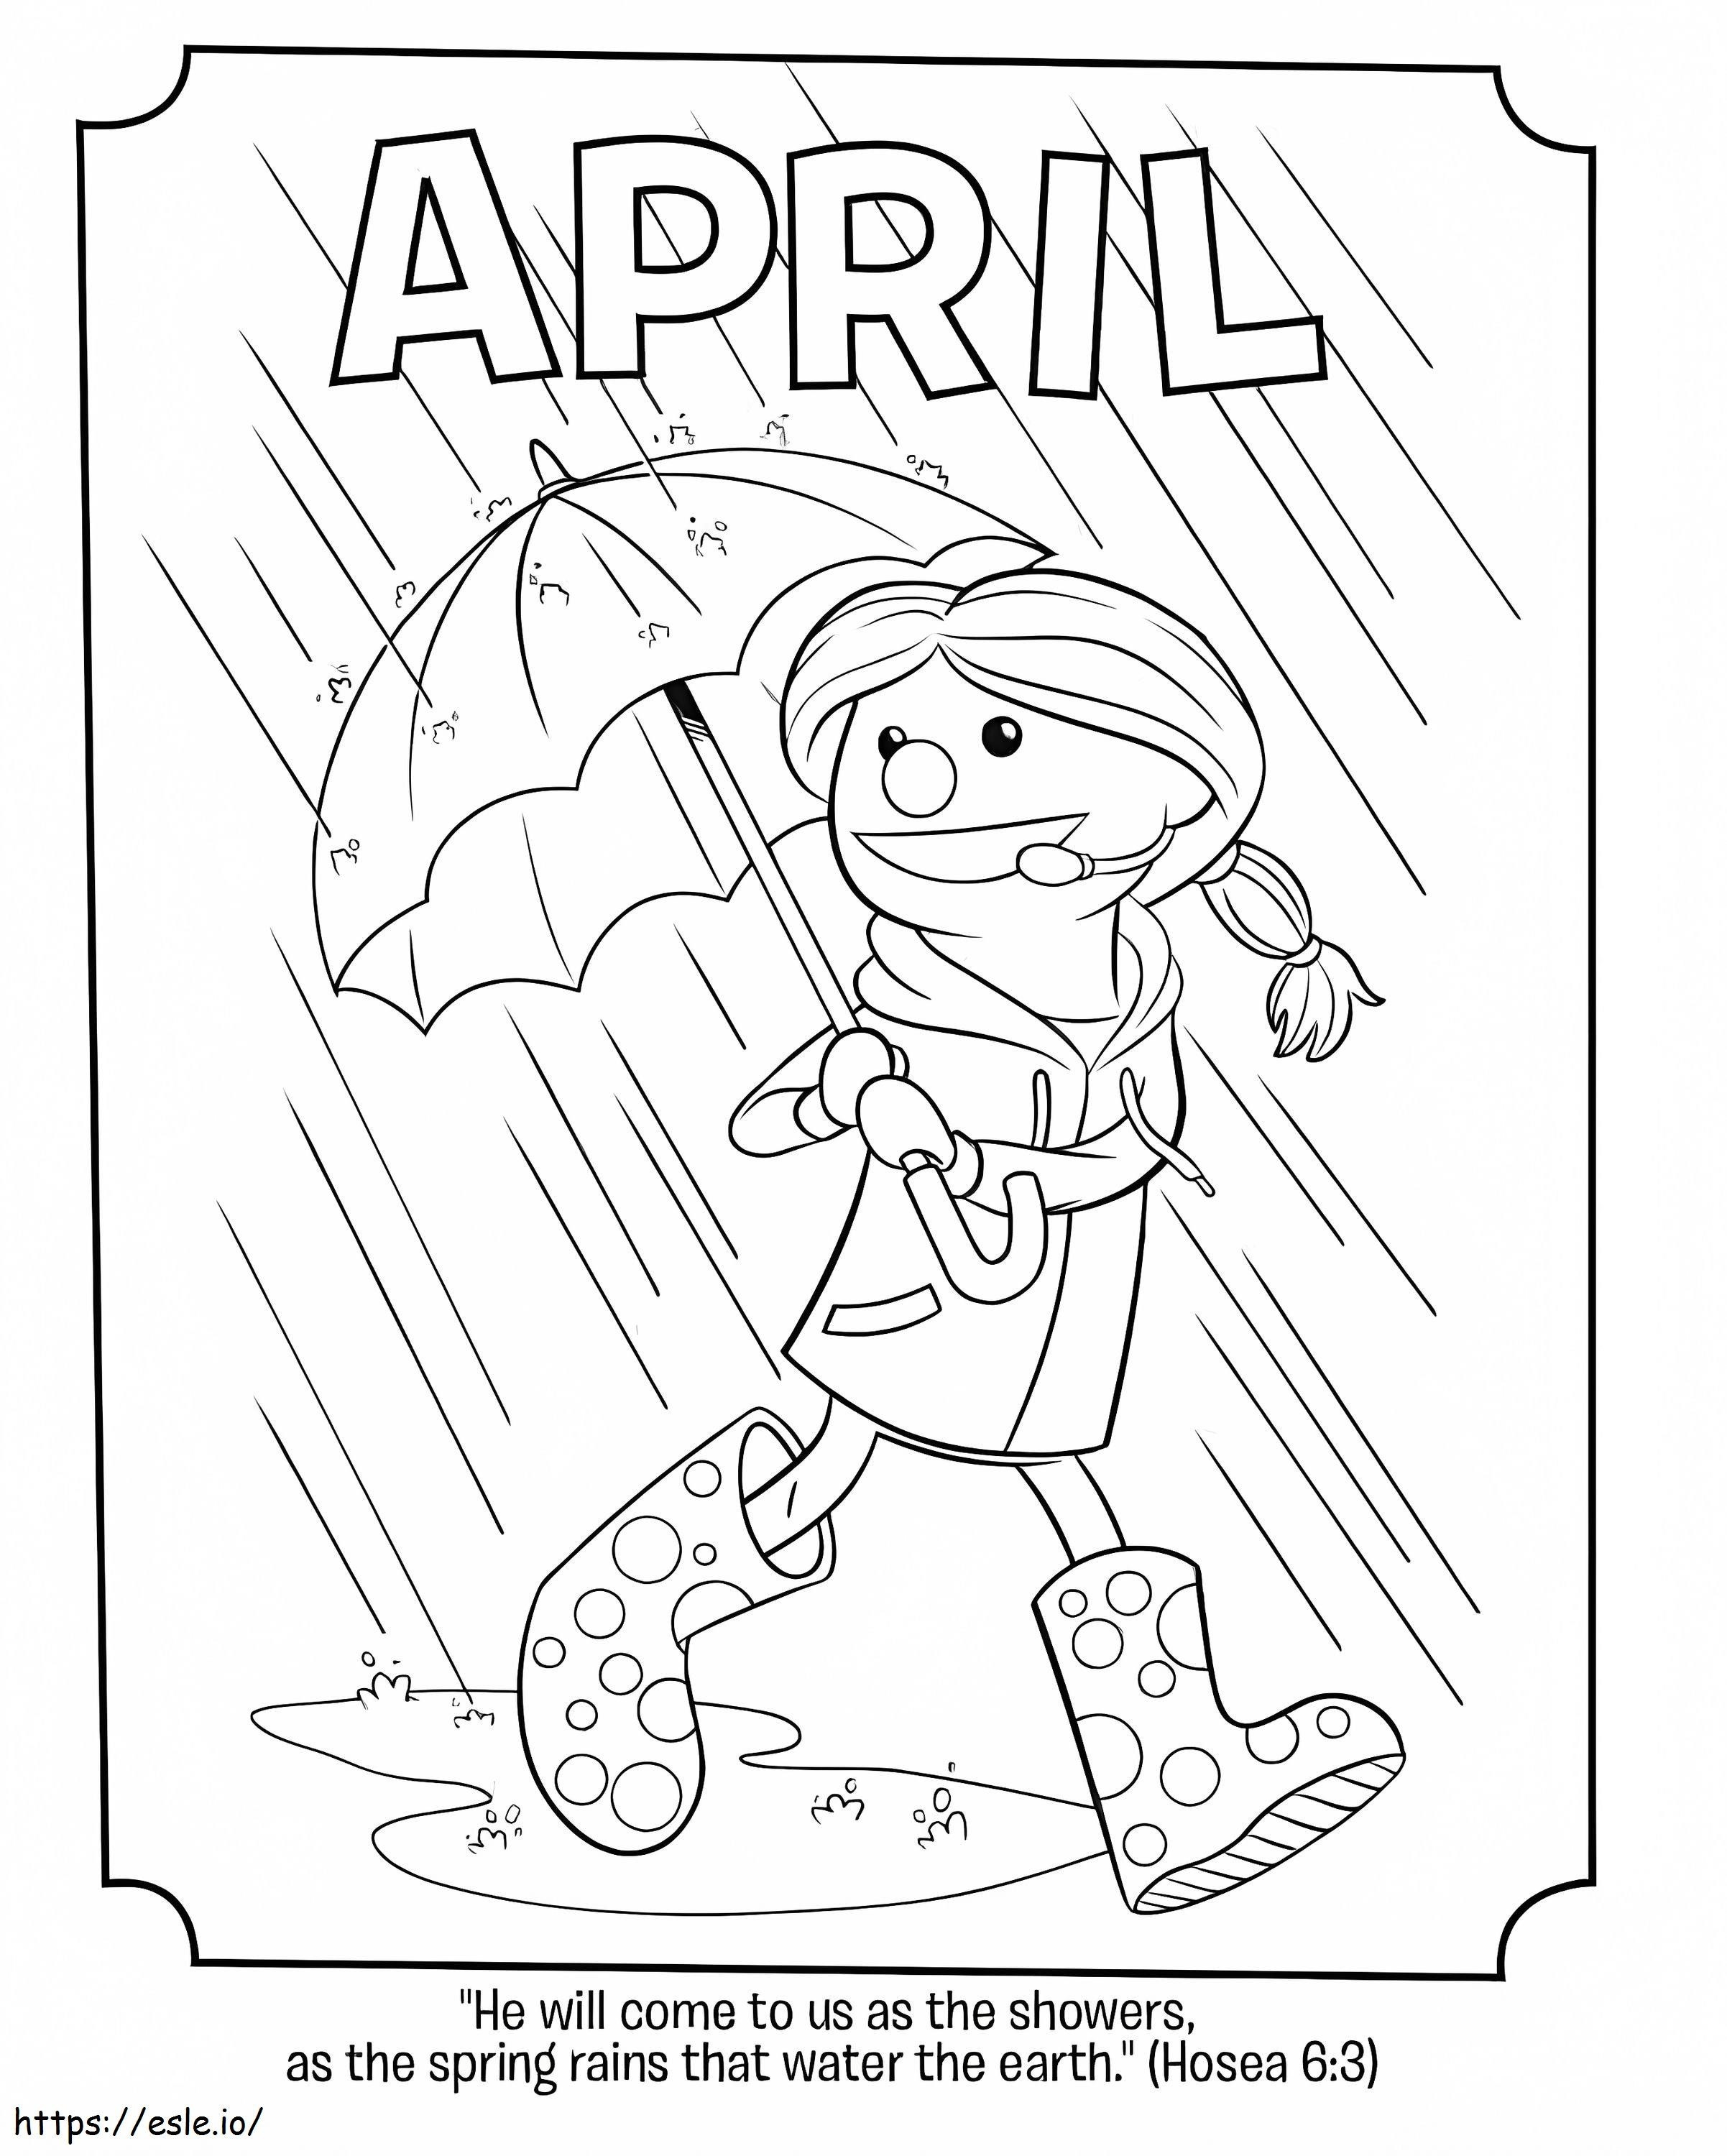 April 10Th coloring page